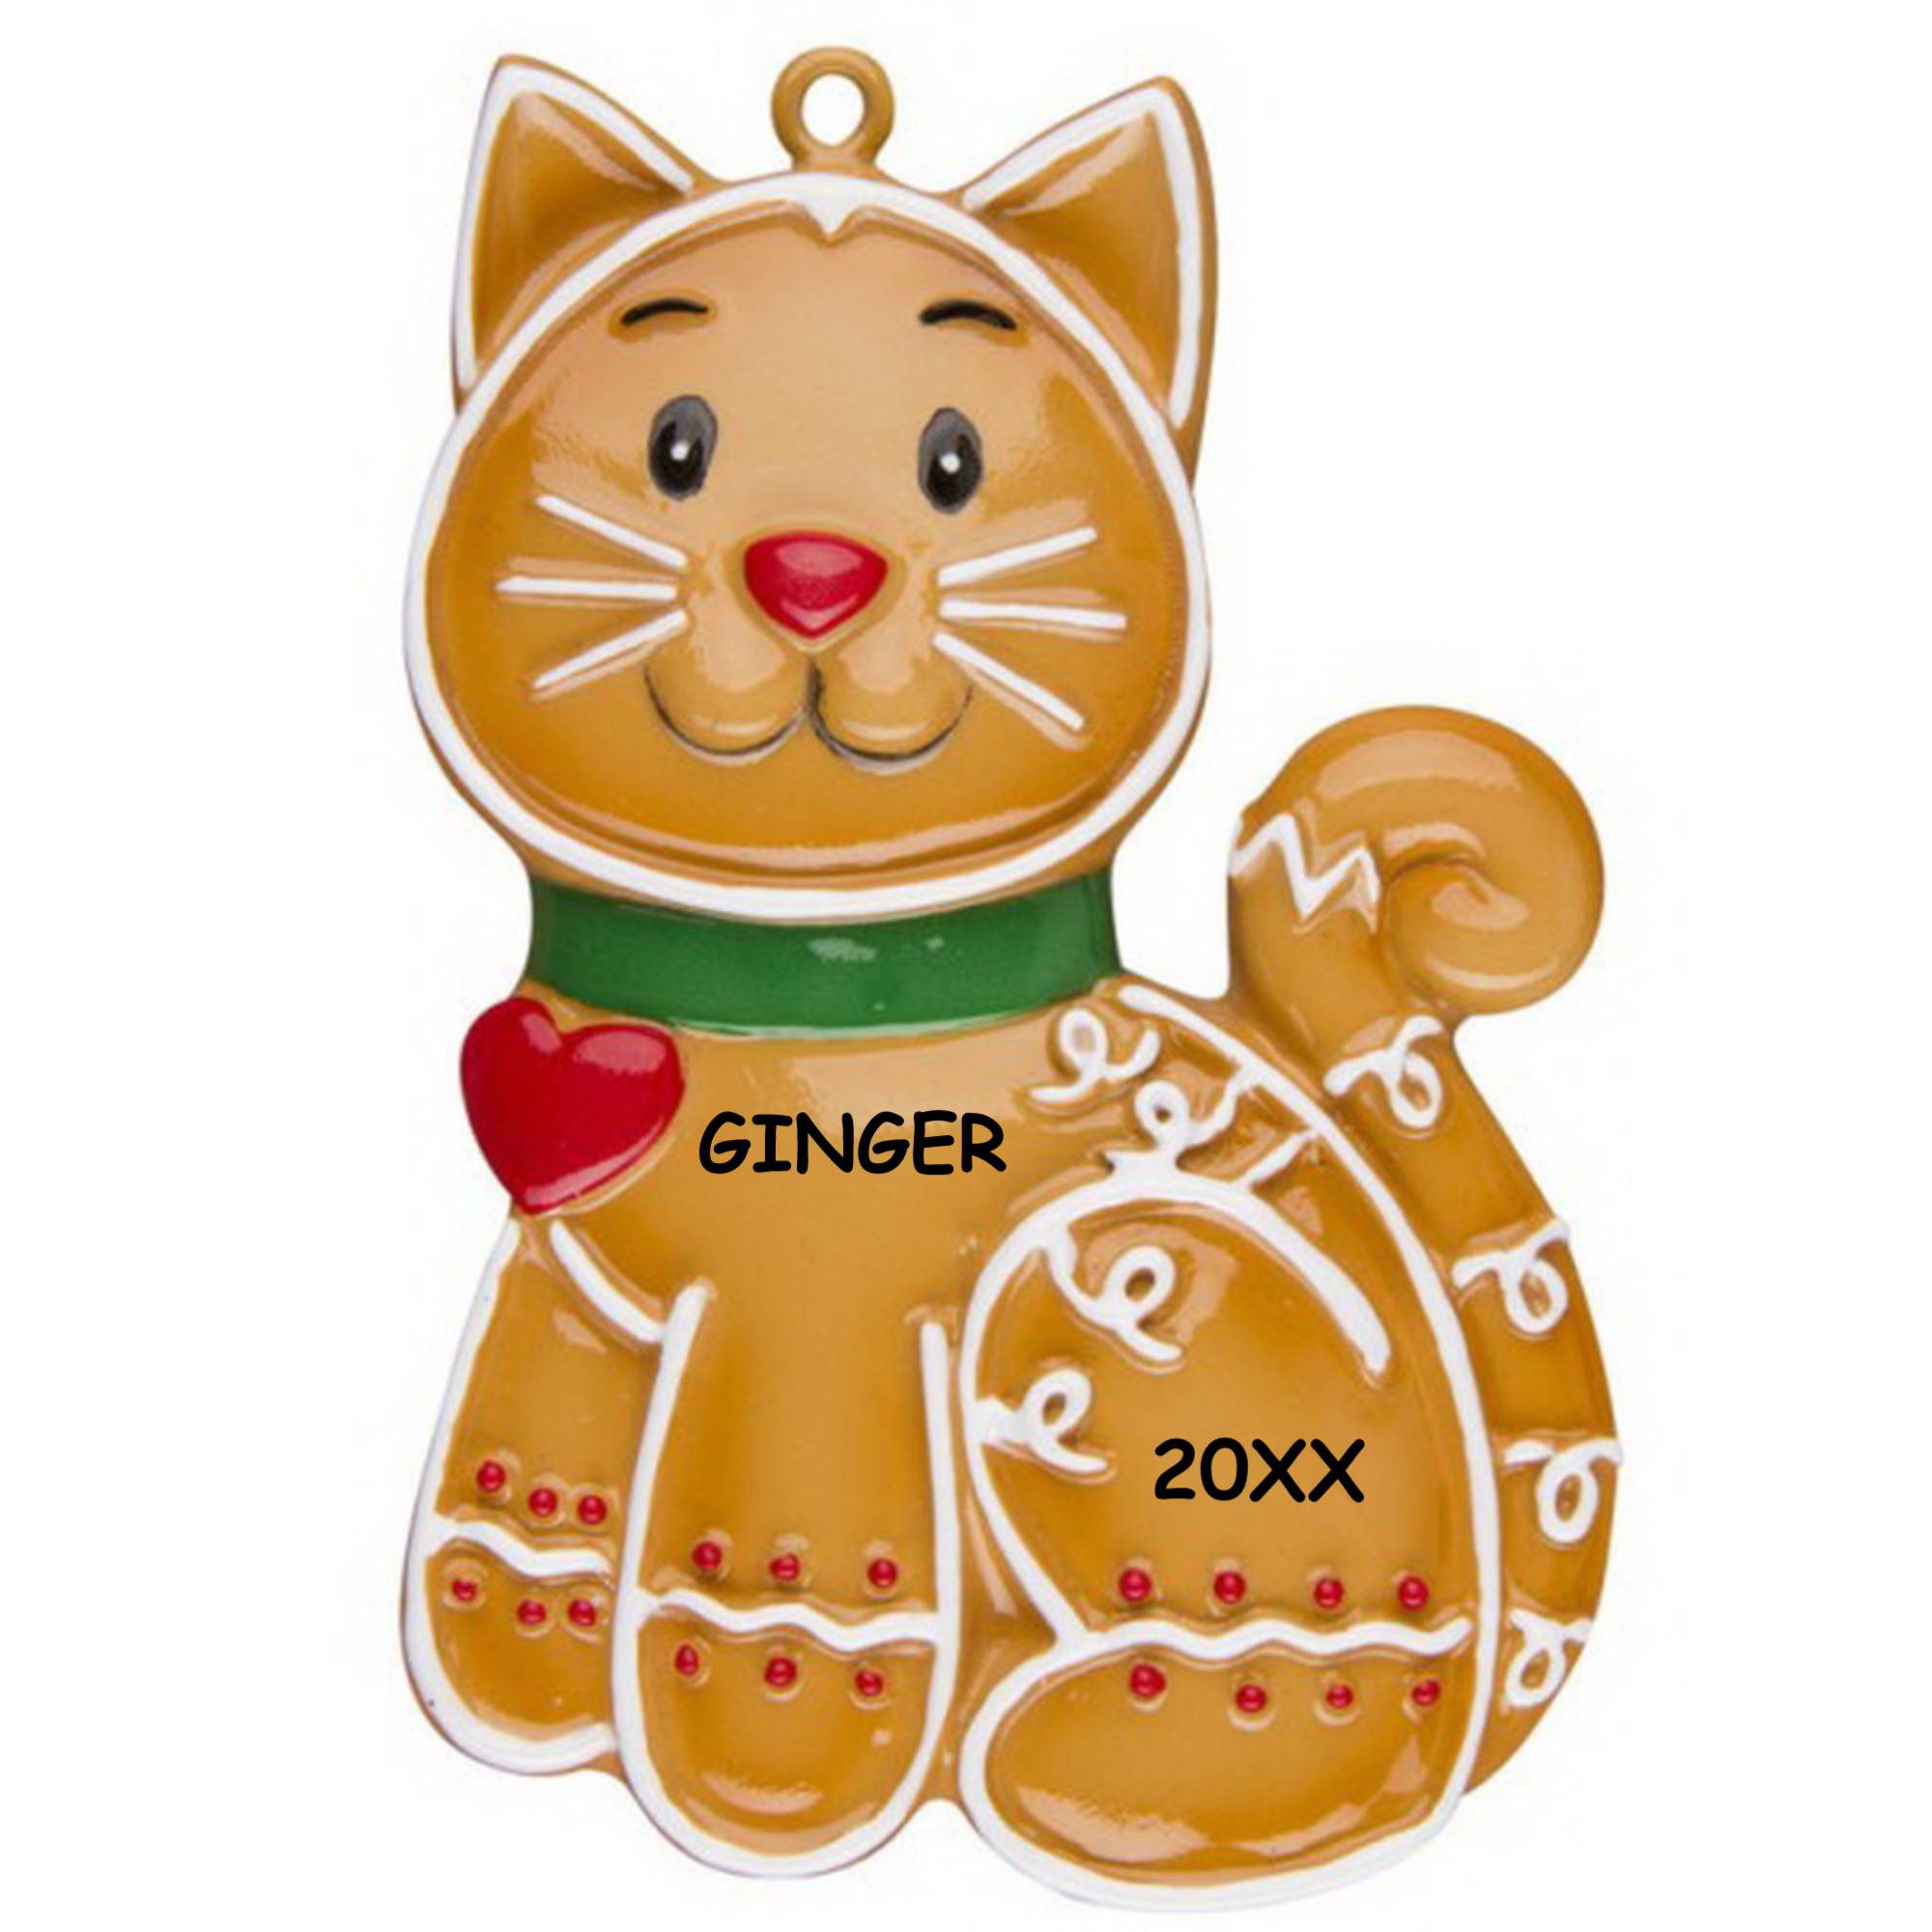 Personalized Ginger-bred Cat Christmas Ornament